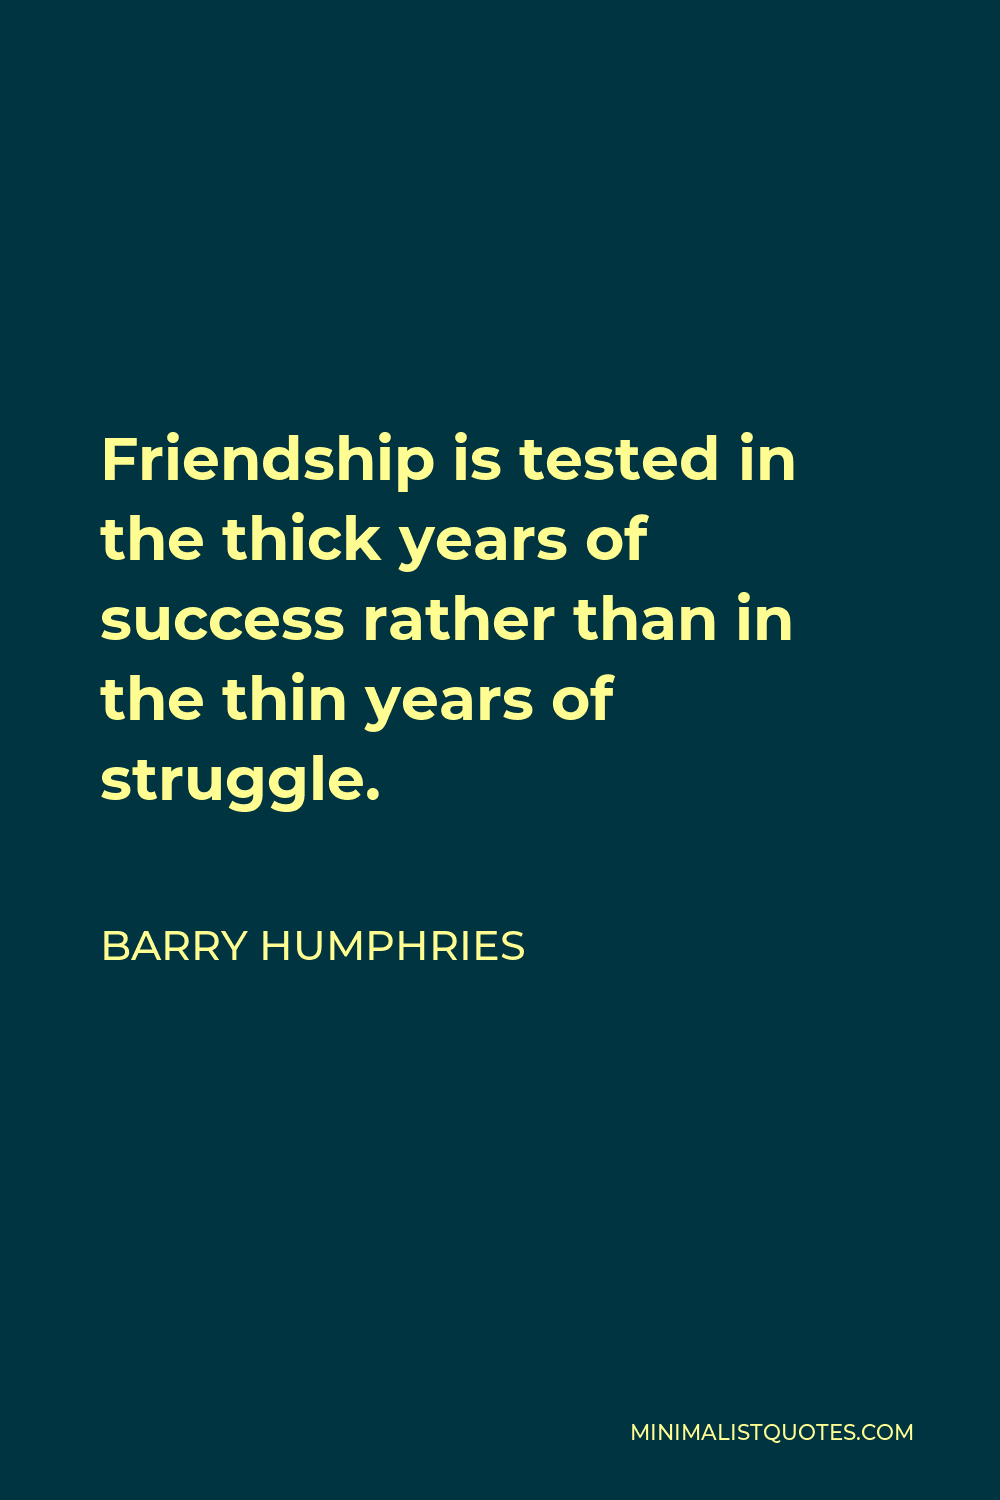 Barry Humphries Quote - Friendship is tested in the thick years of success rather than in the thin years of struggle.